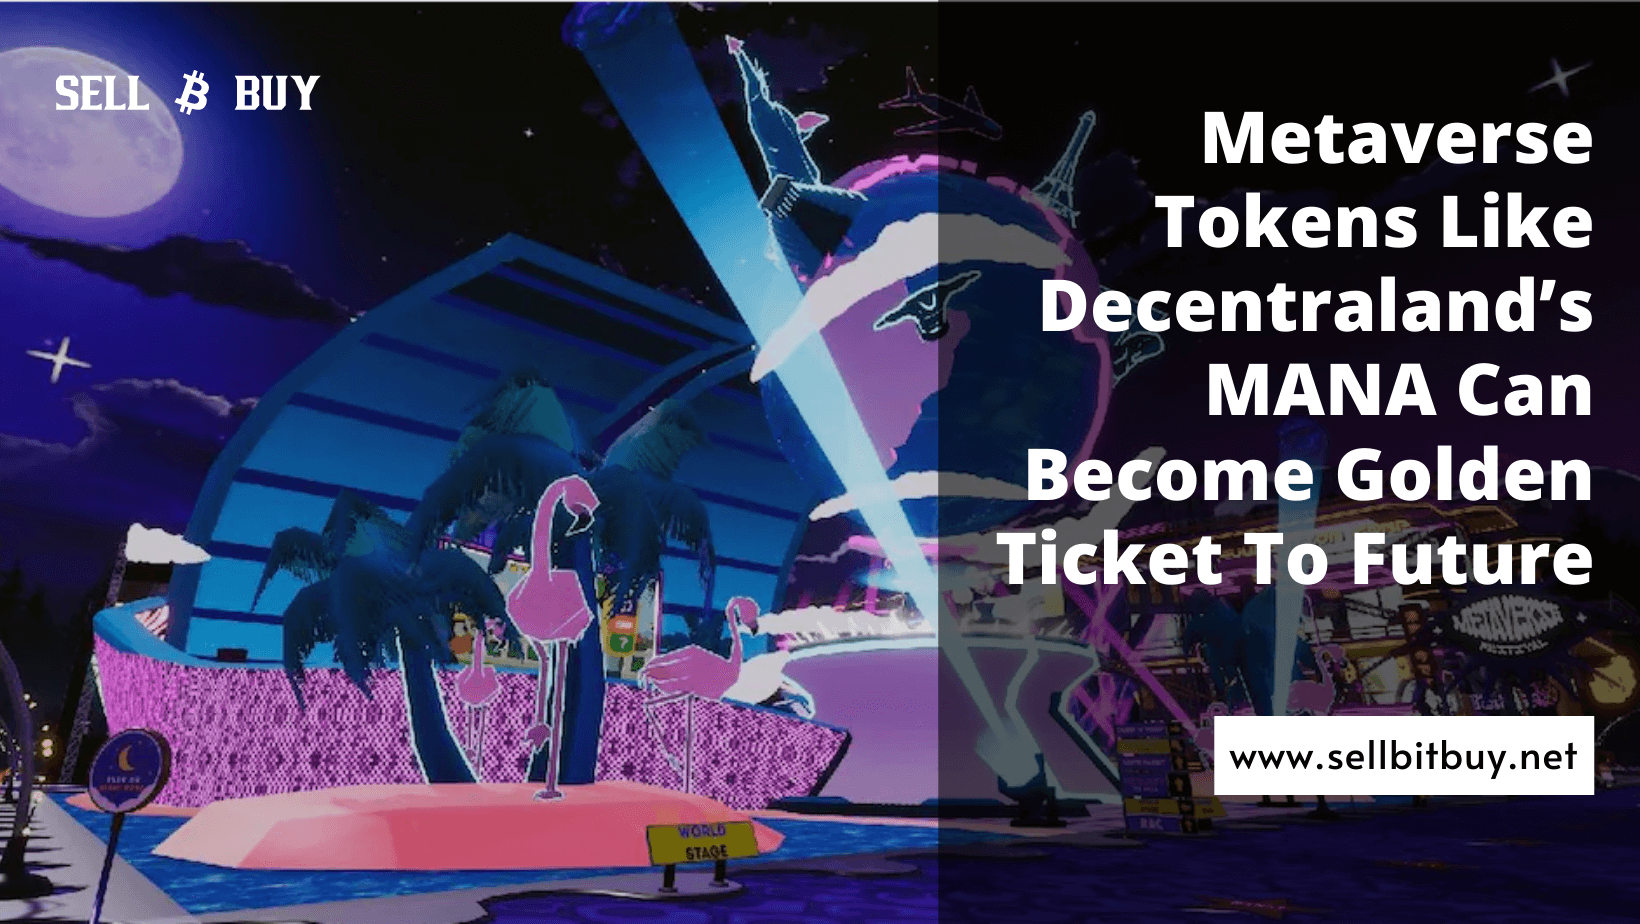 Article about Metaverse Tokens Like Decentraland’s MANA Can Become Golden Ticket To Future